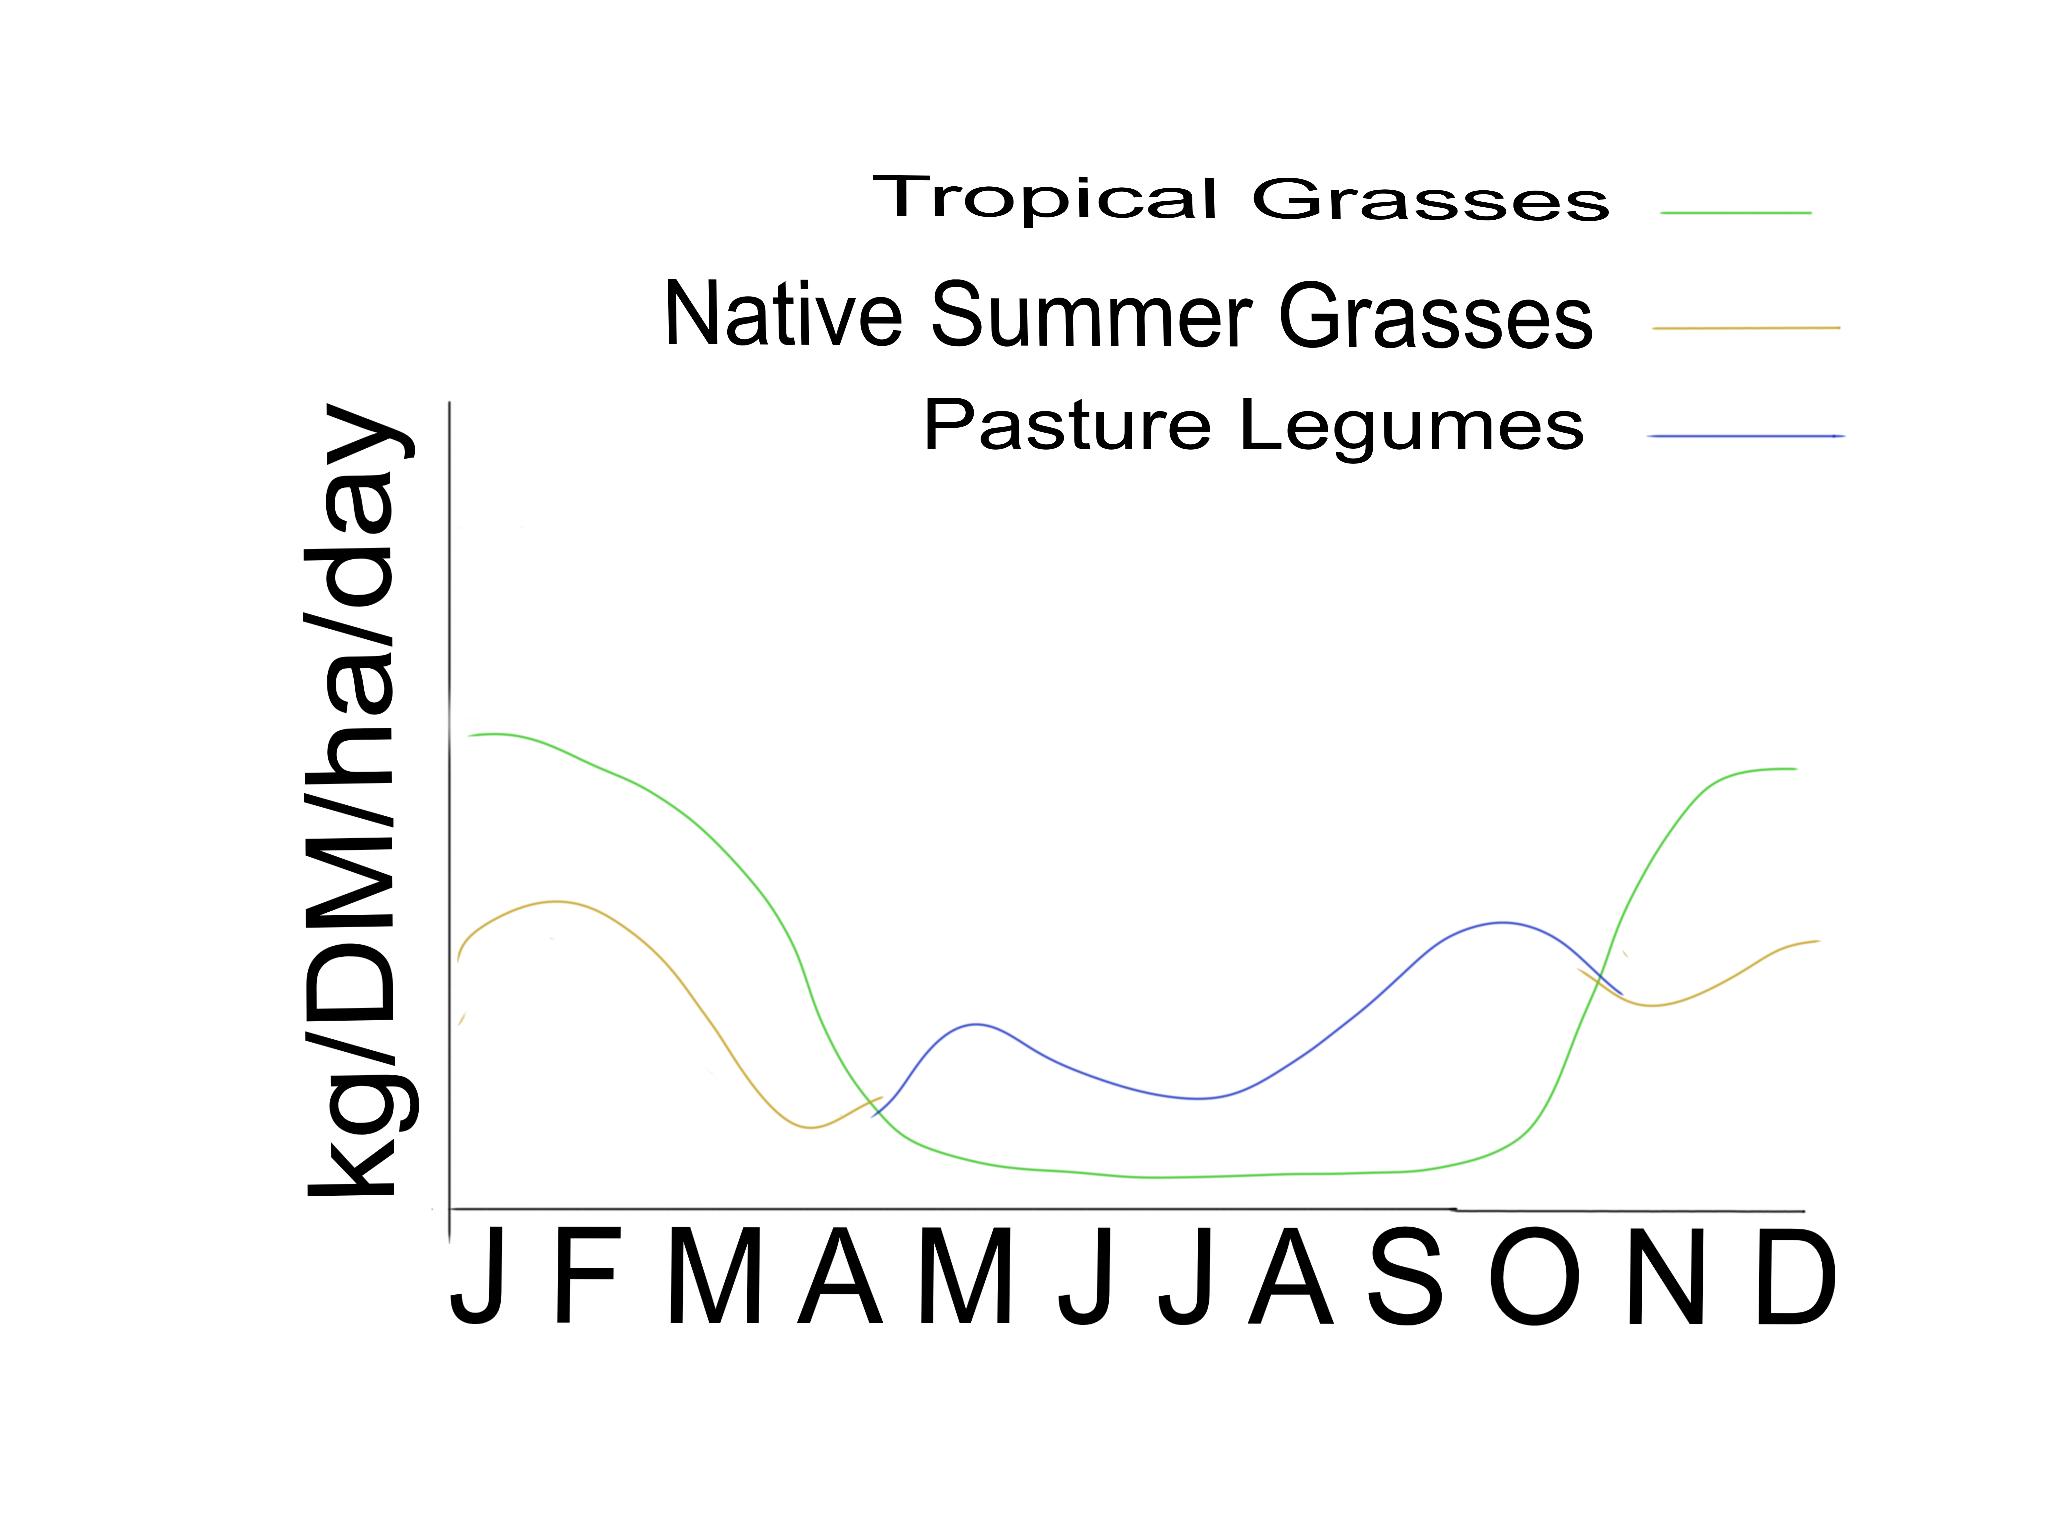 Line graph showing reduced legume growth in winter